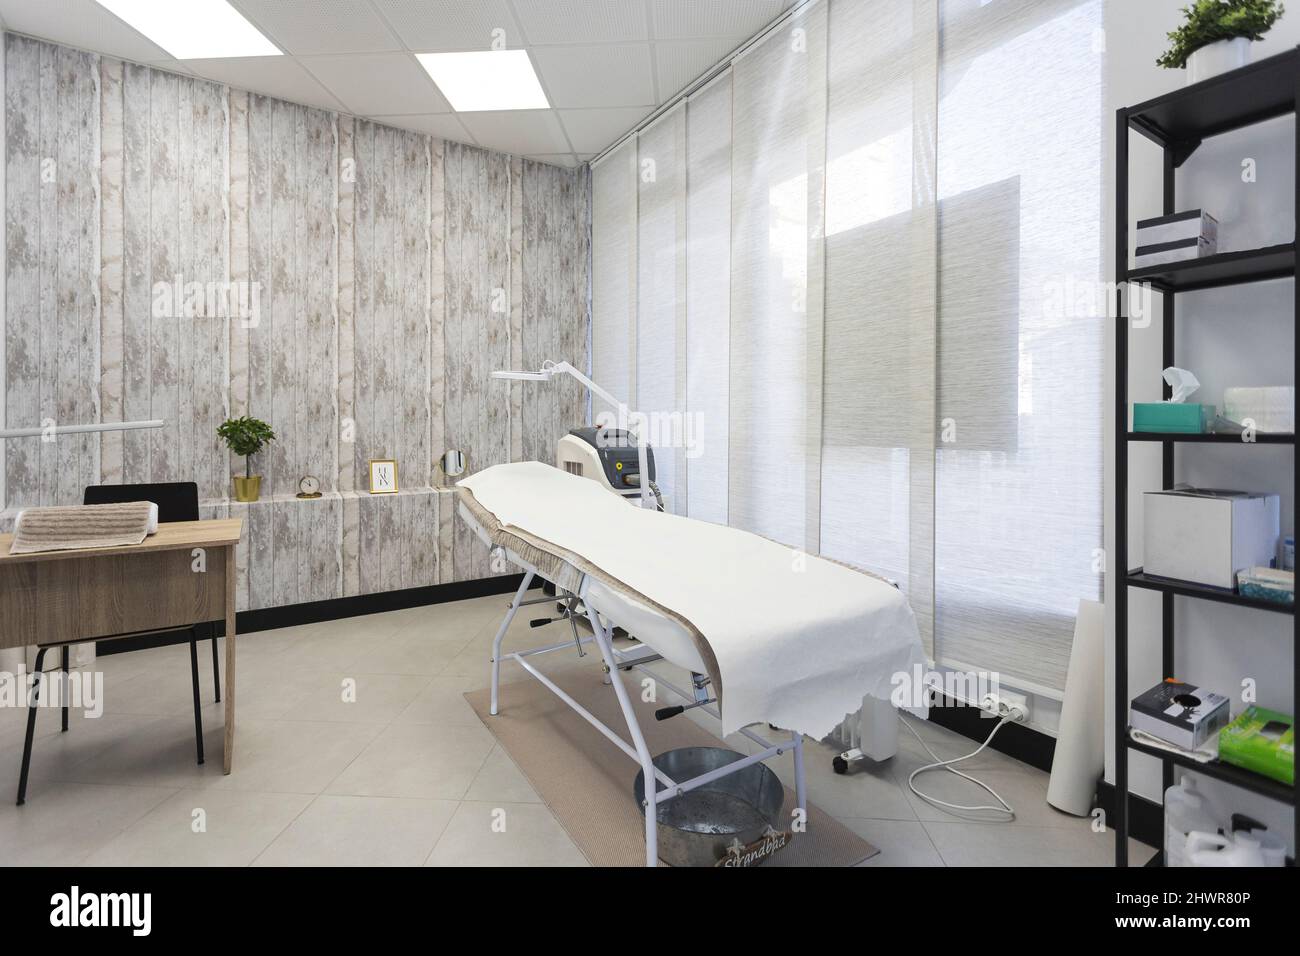 Empty skin care treatment room at aesthetic clinic Stock Photo